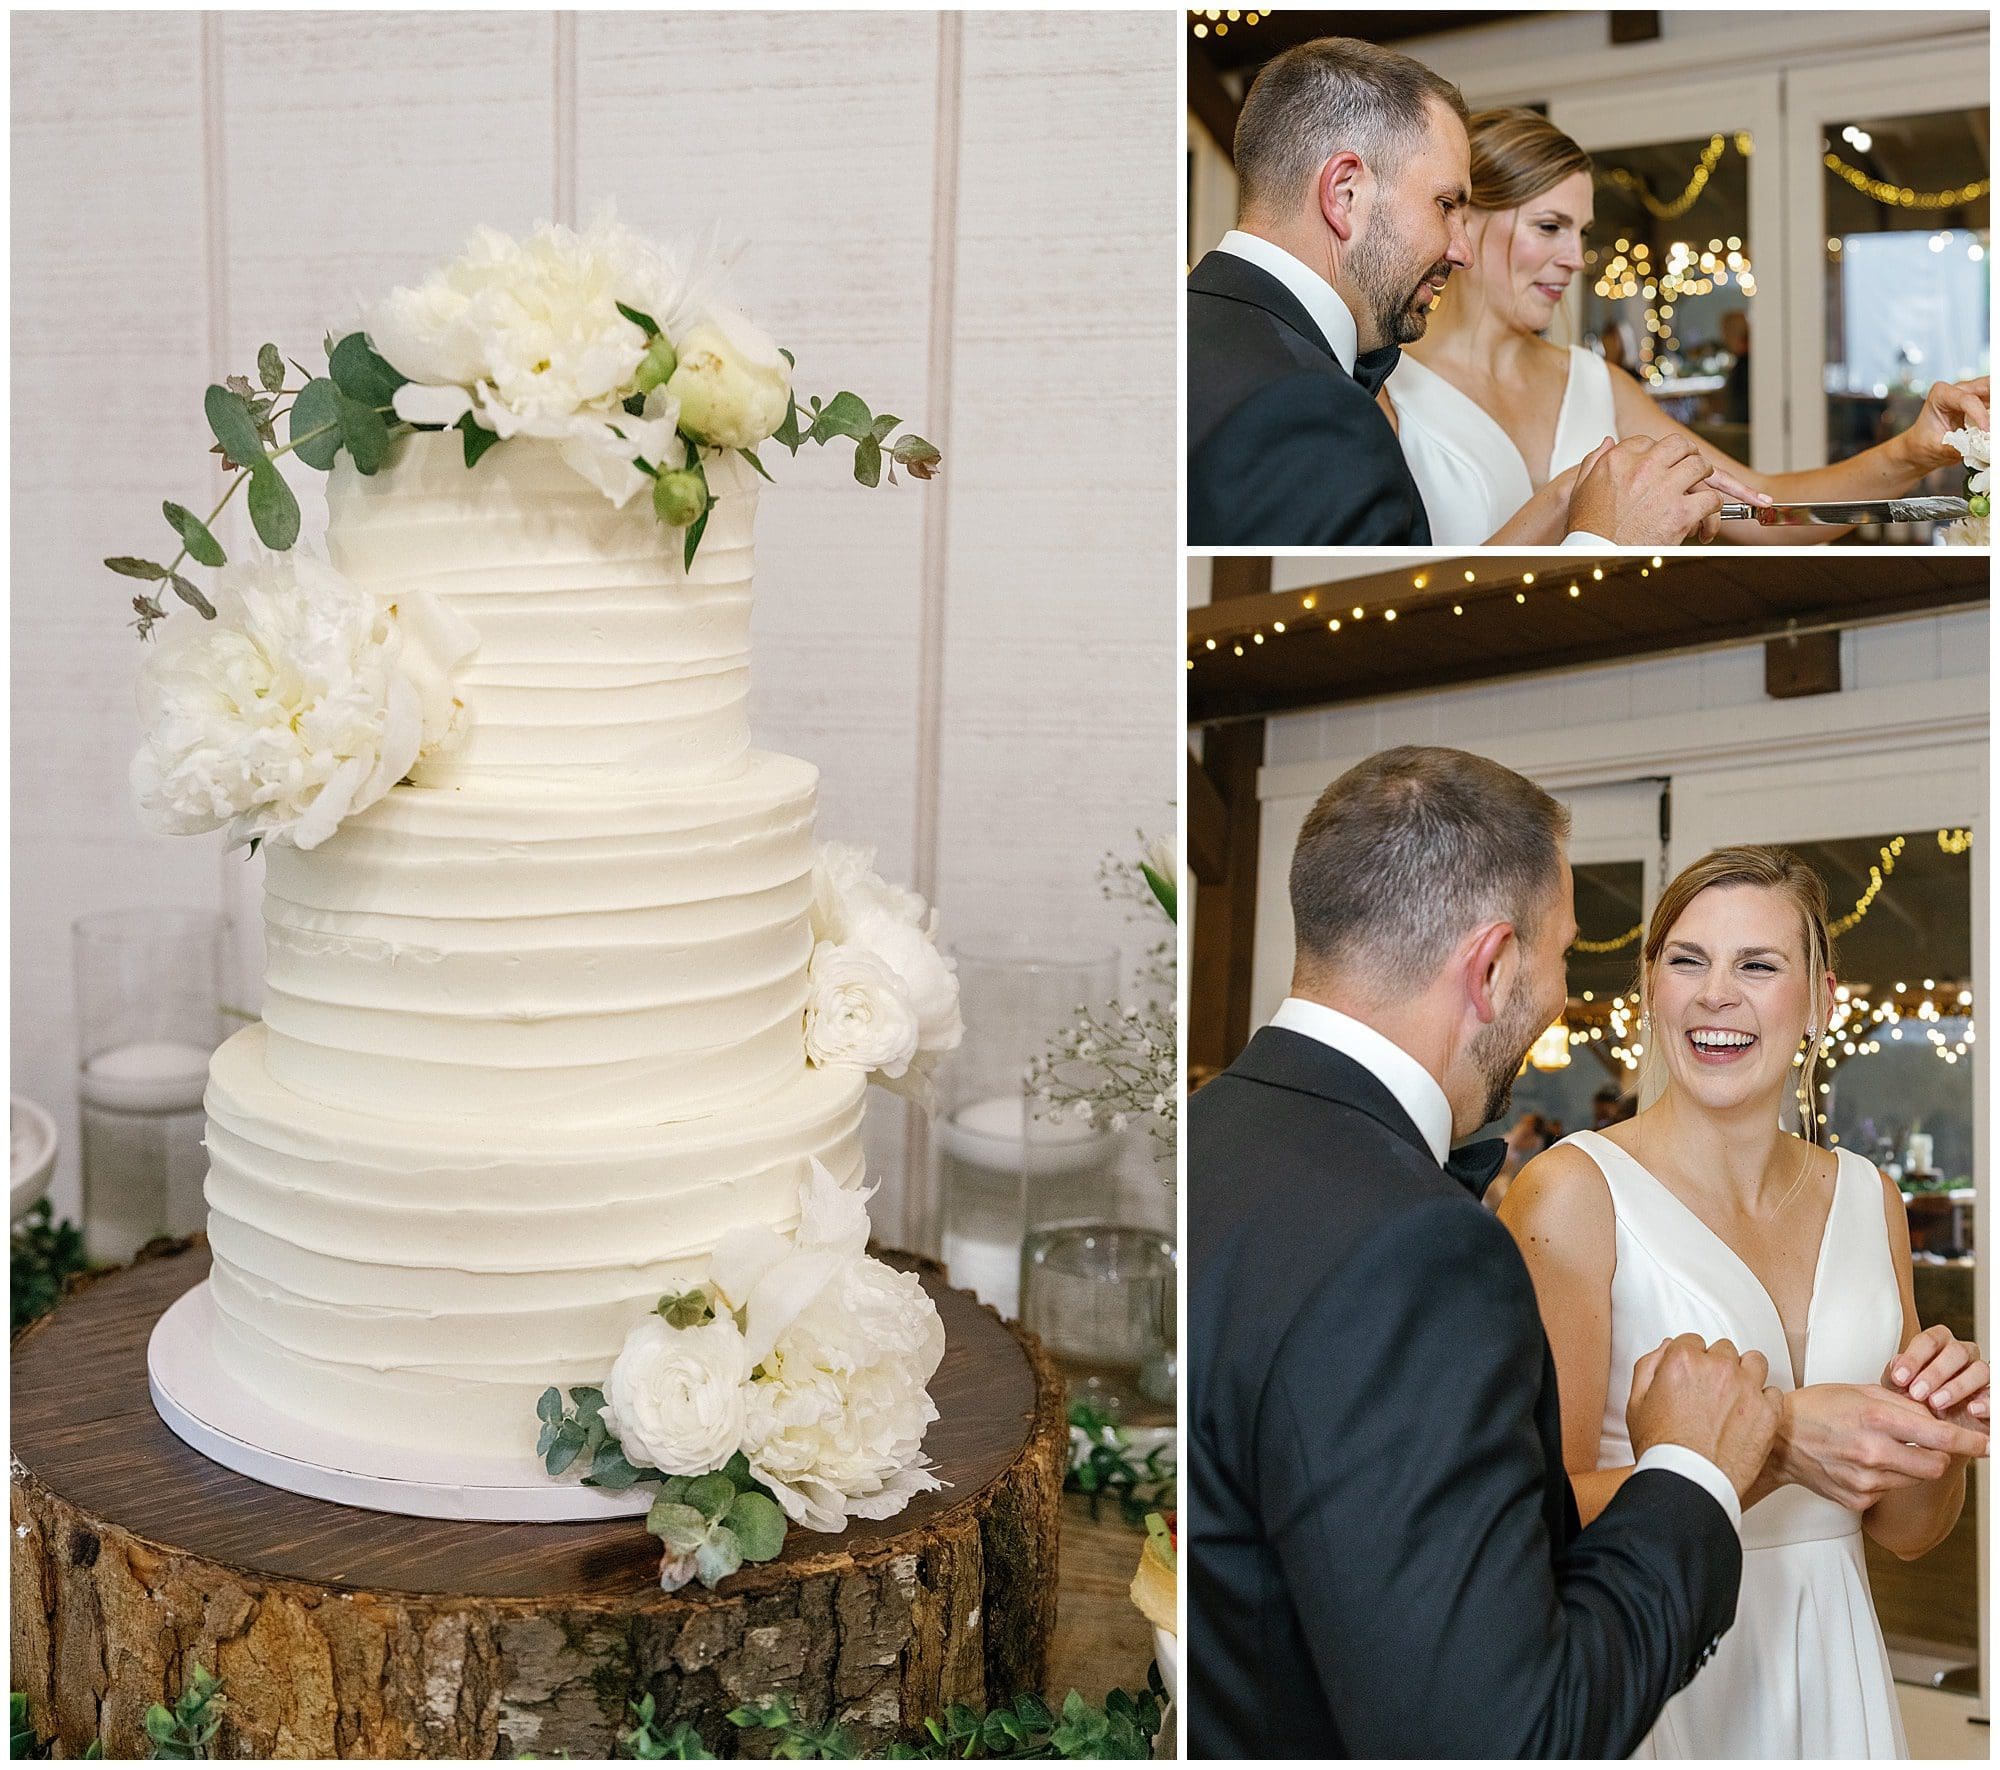 cake cutting by bride and groom cake with white textured icing decorated with white flowers greenery